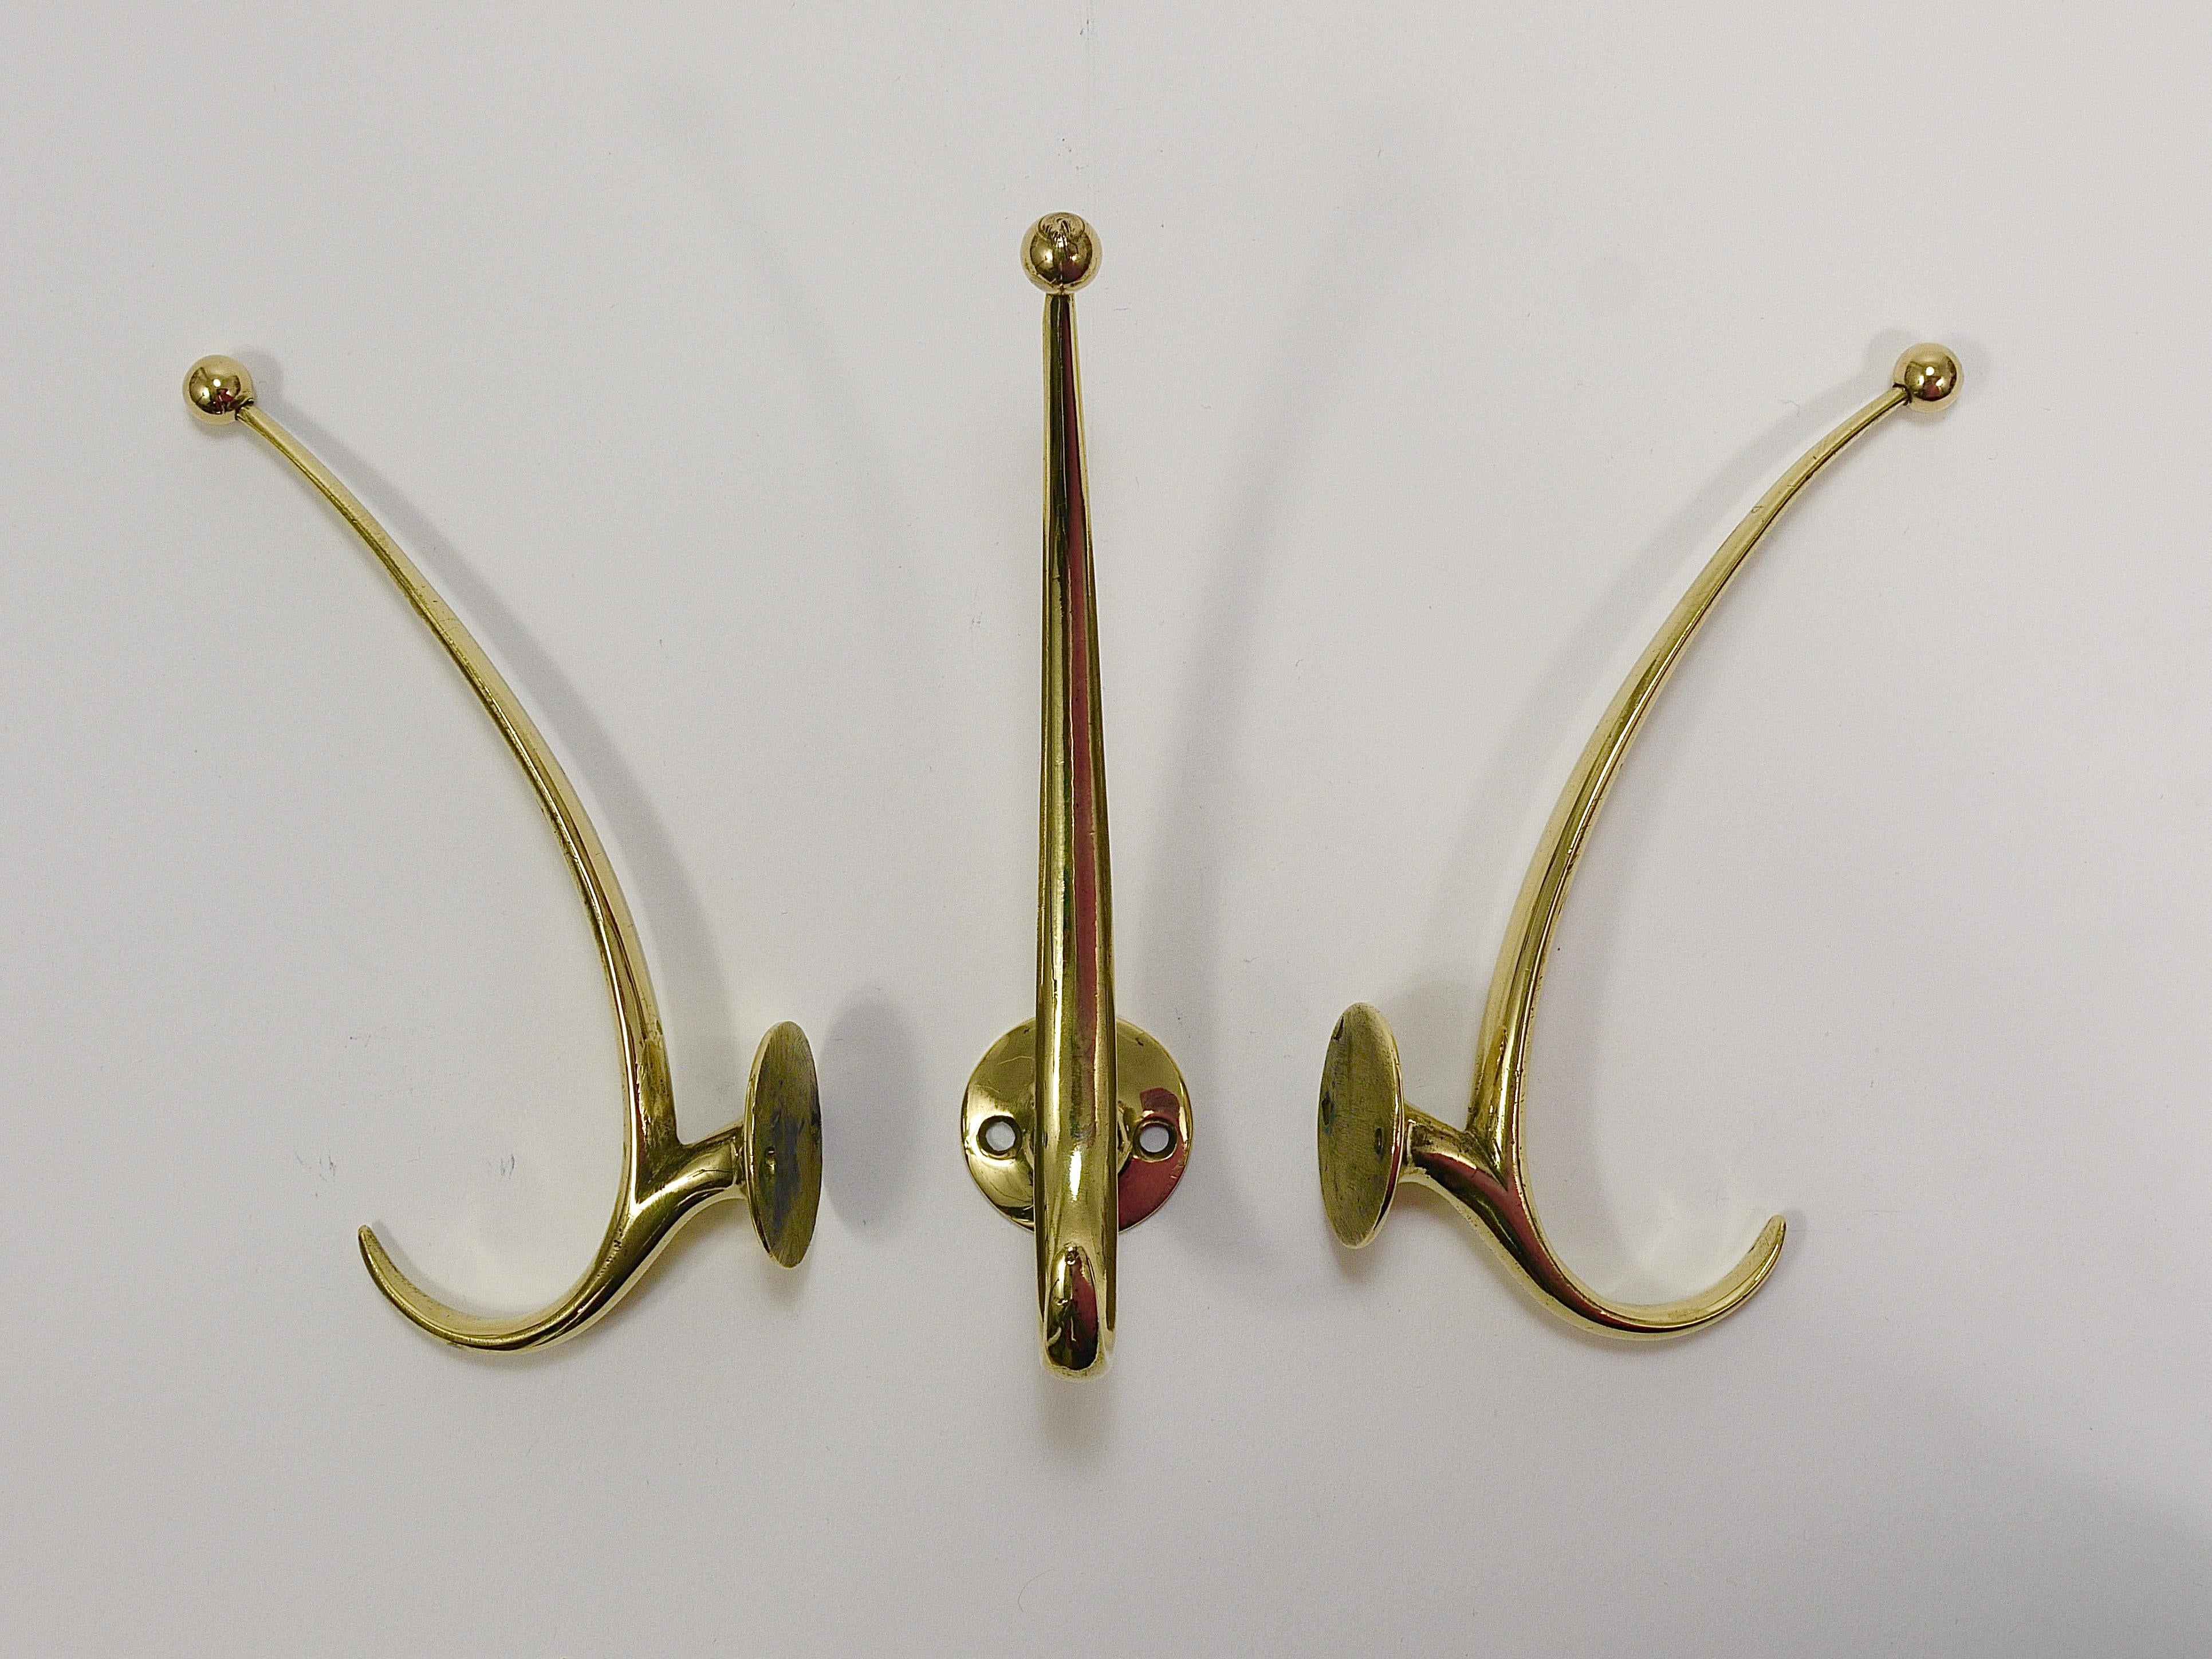 Six Franz Hagenauer Vienna Mid-Century Curved Brass Wall Coat Hooks, 1950s For Sale 4